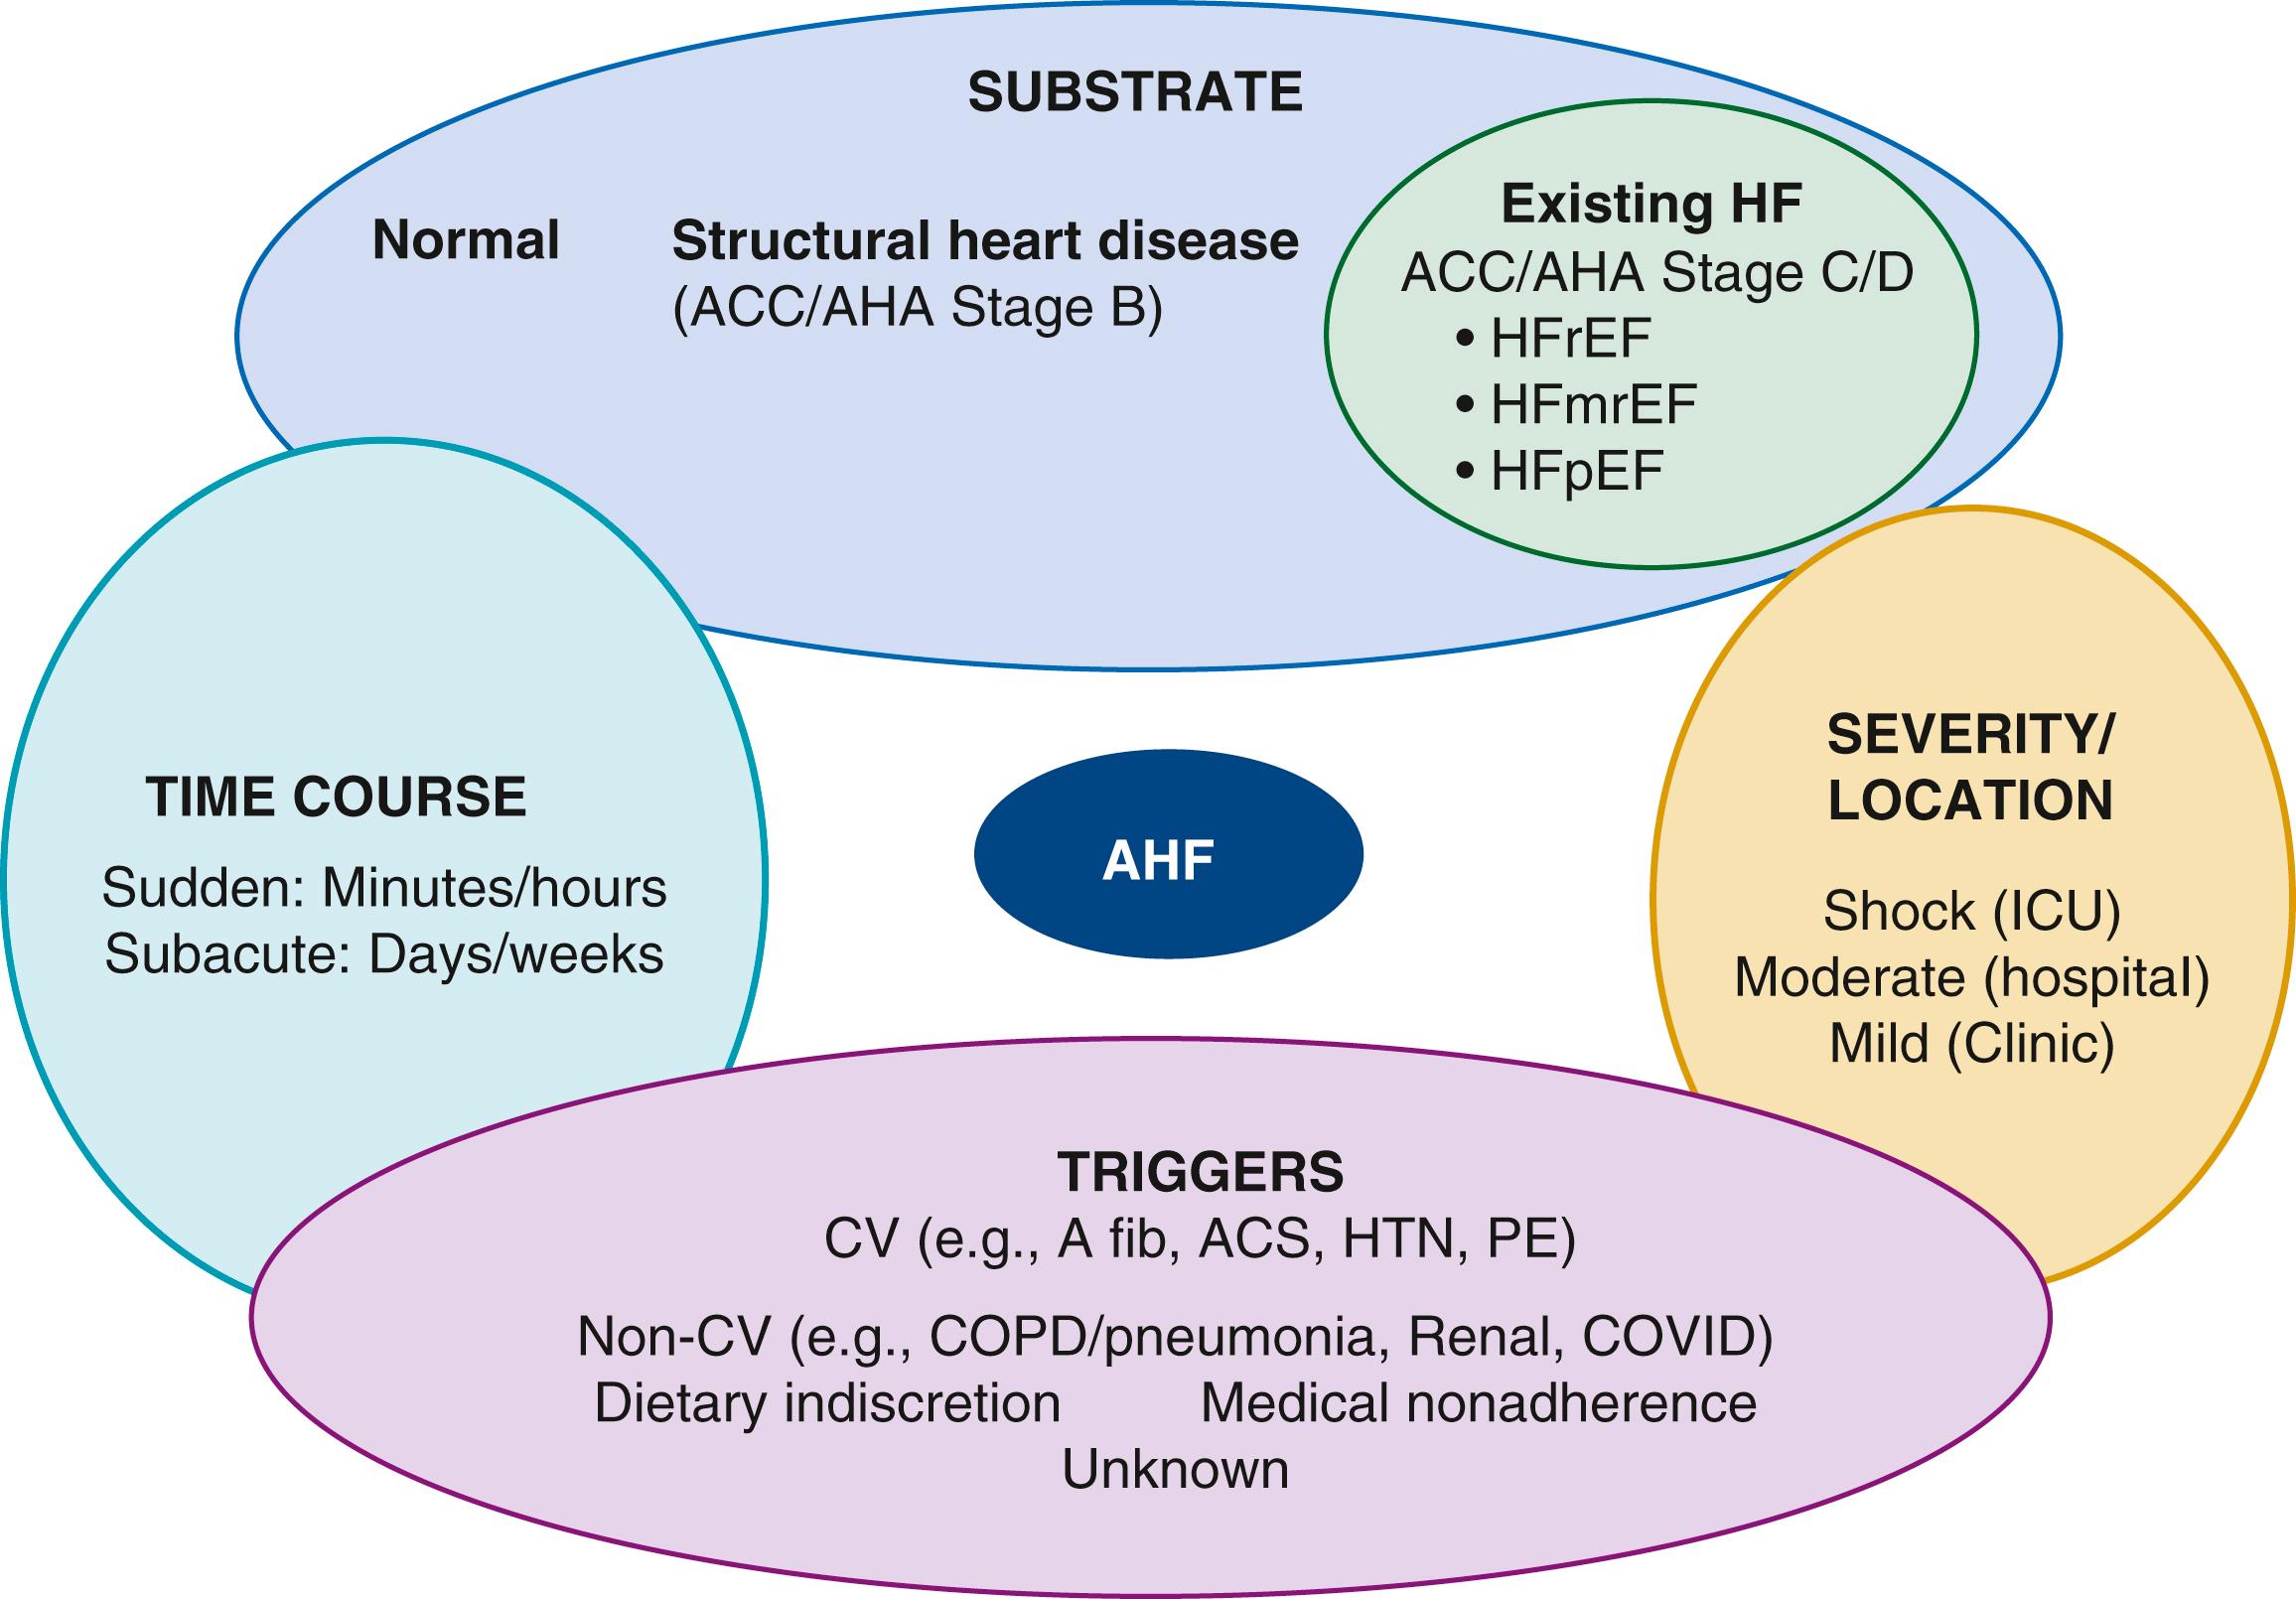 FIGURE 49.7, Systematic approach to classification of patients with acute heart failure.